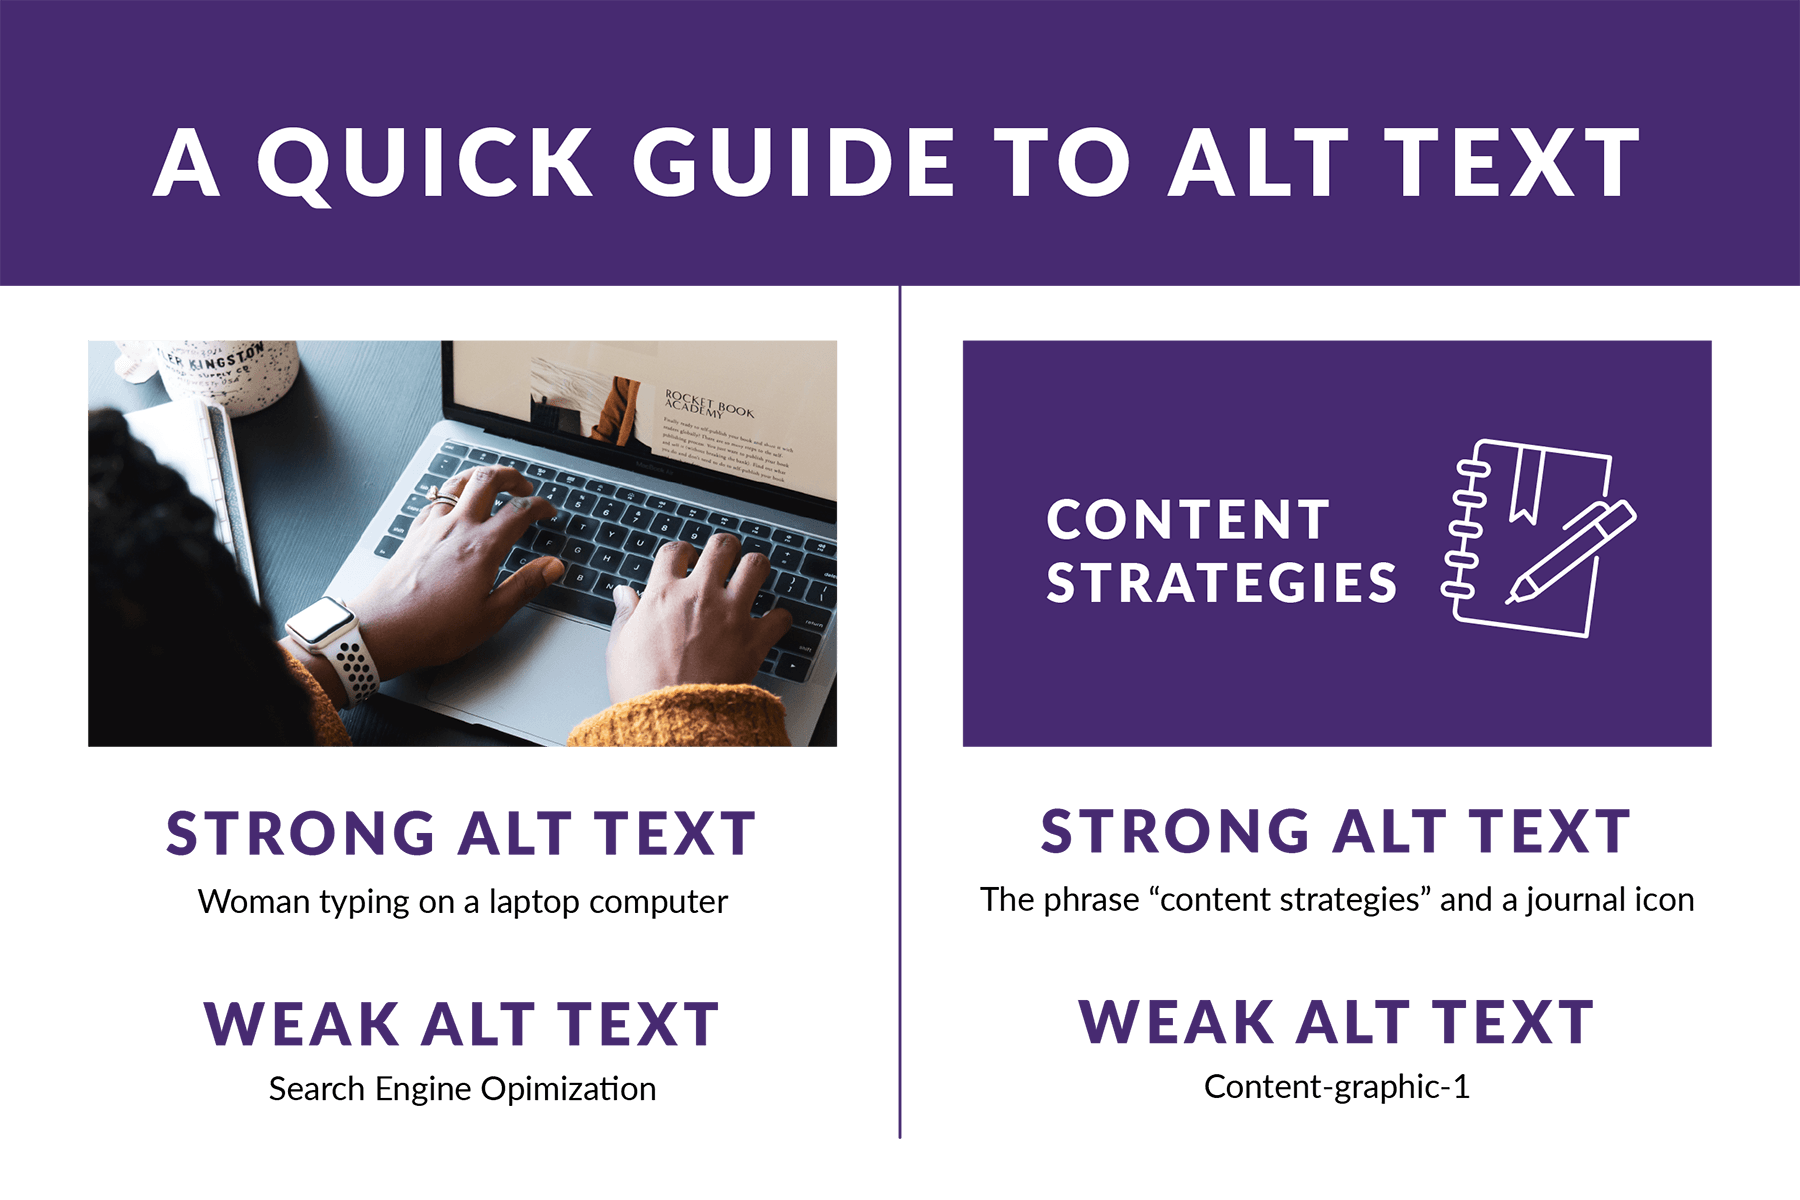 Small infographic with “A Quick Guide to Alt Text” title at the top, an image of a woman typing on a laptop on the left, and a graphic of the phrase "content strategies" and a journal icon on the right